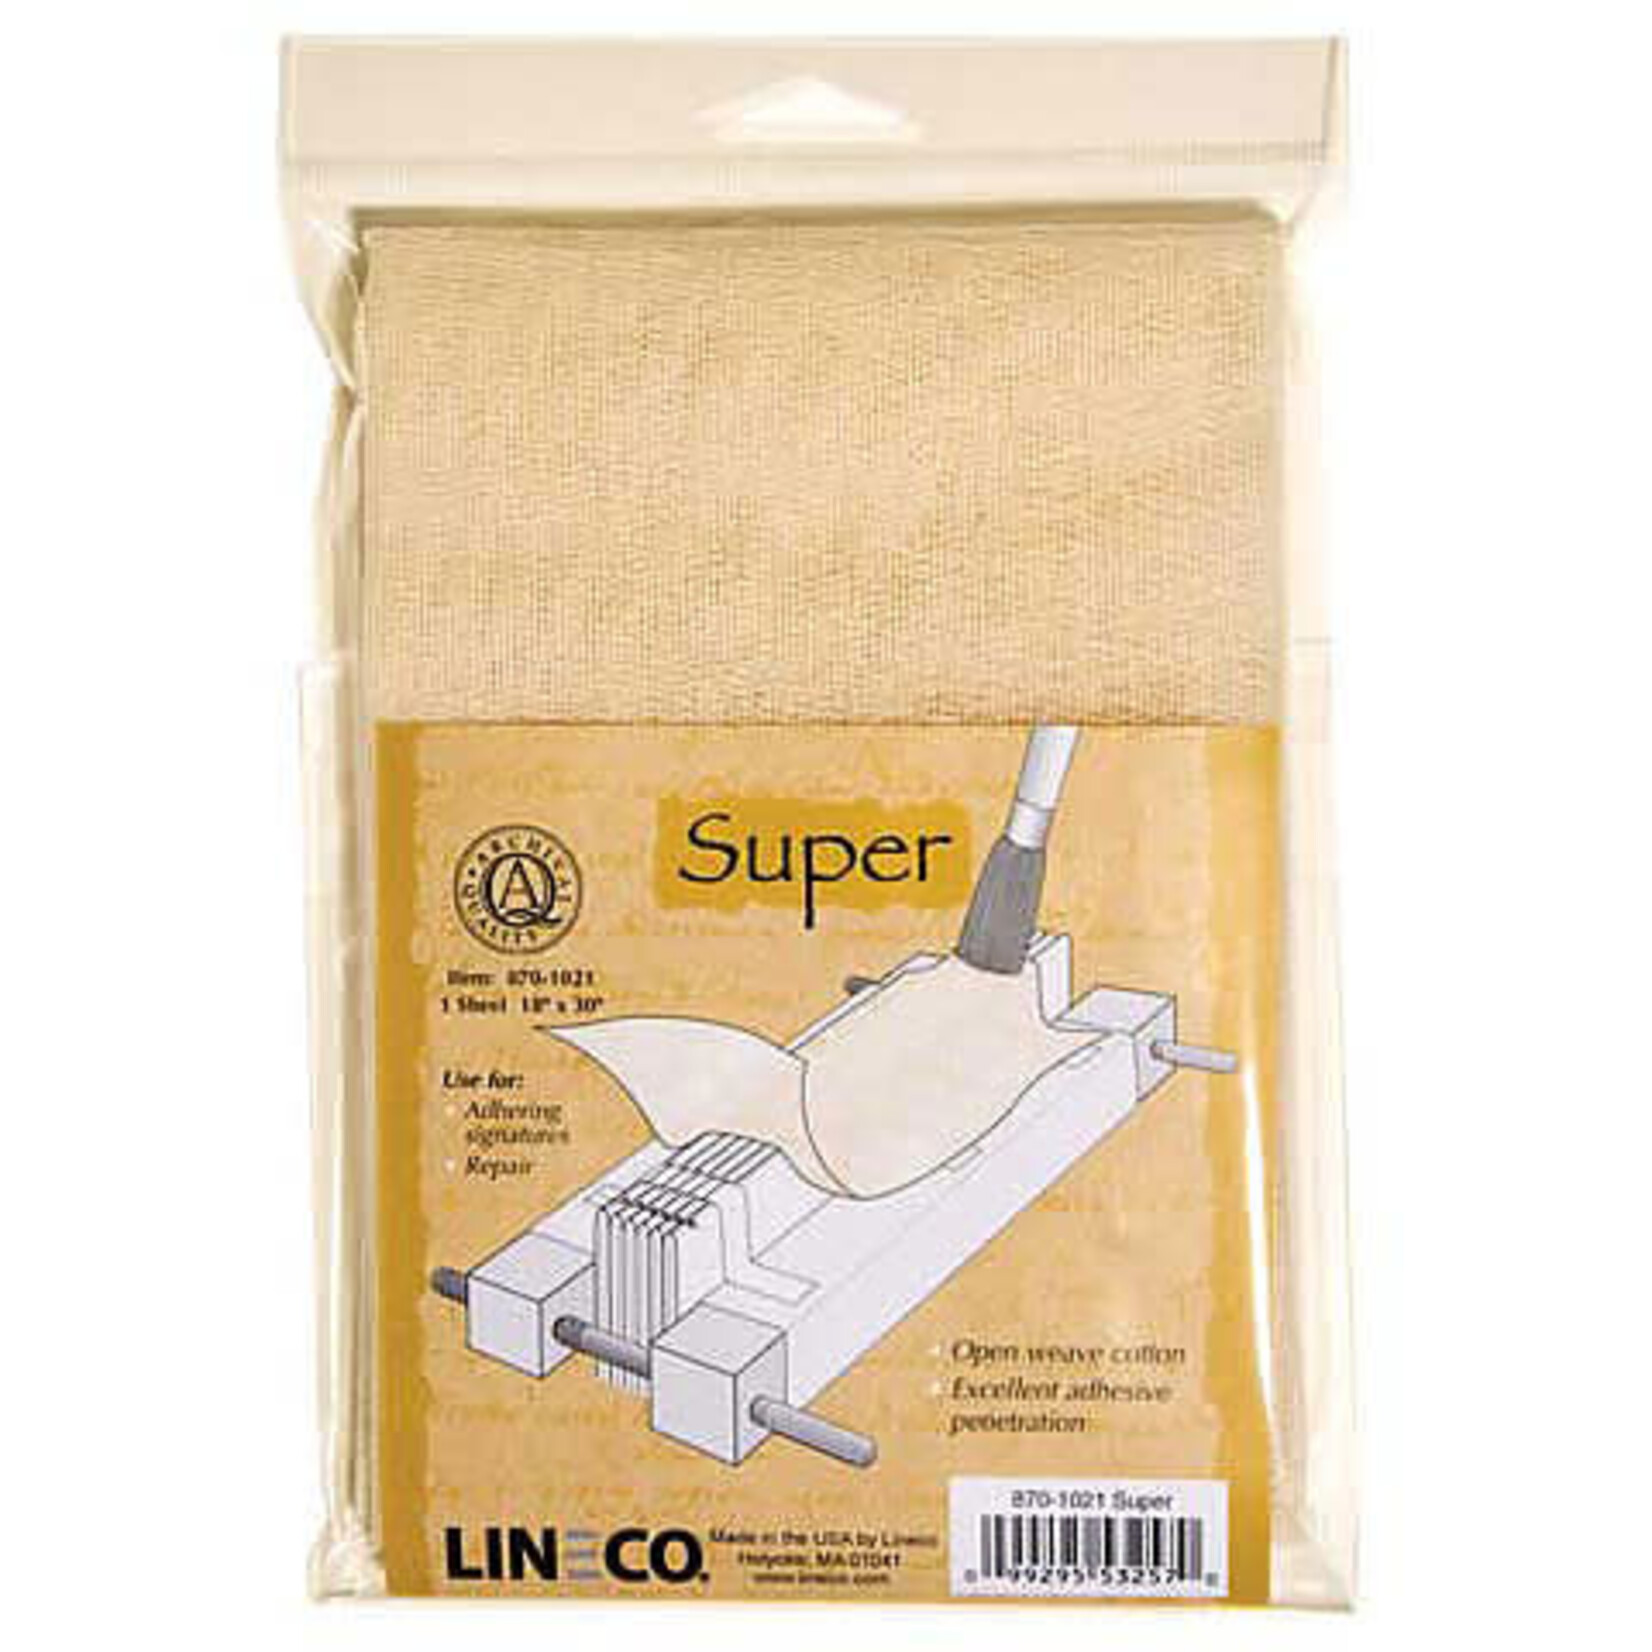 Lineco Super-Cotton Sheet 18X36 In